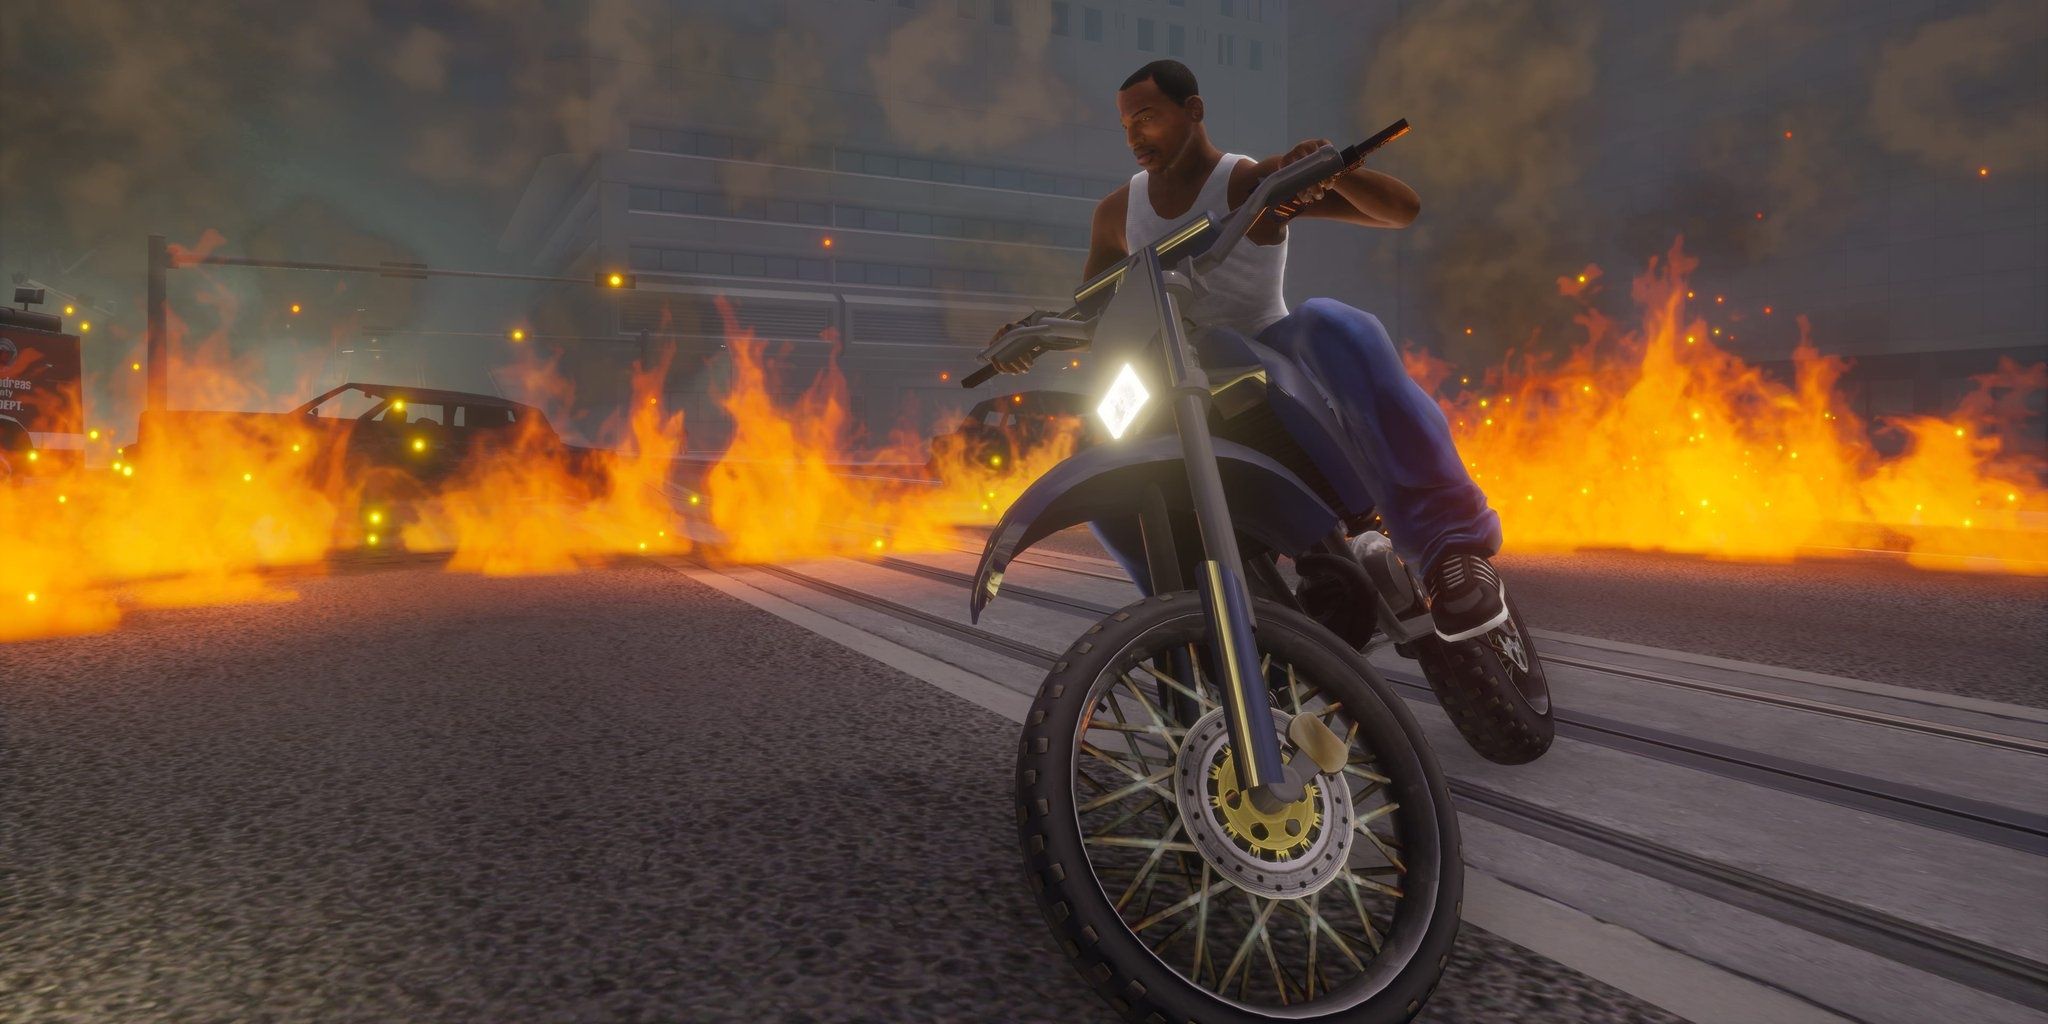 A screenshot showing CJ on a bike in front of flames in Grand Theft Auto: San Andreas - The Definitive Edition